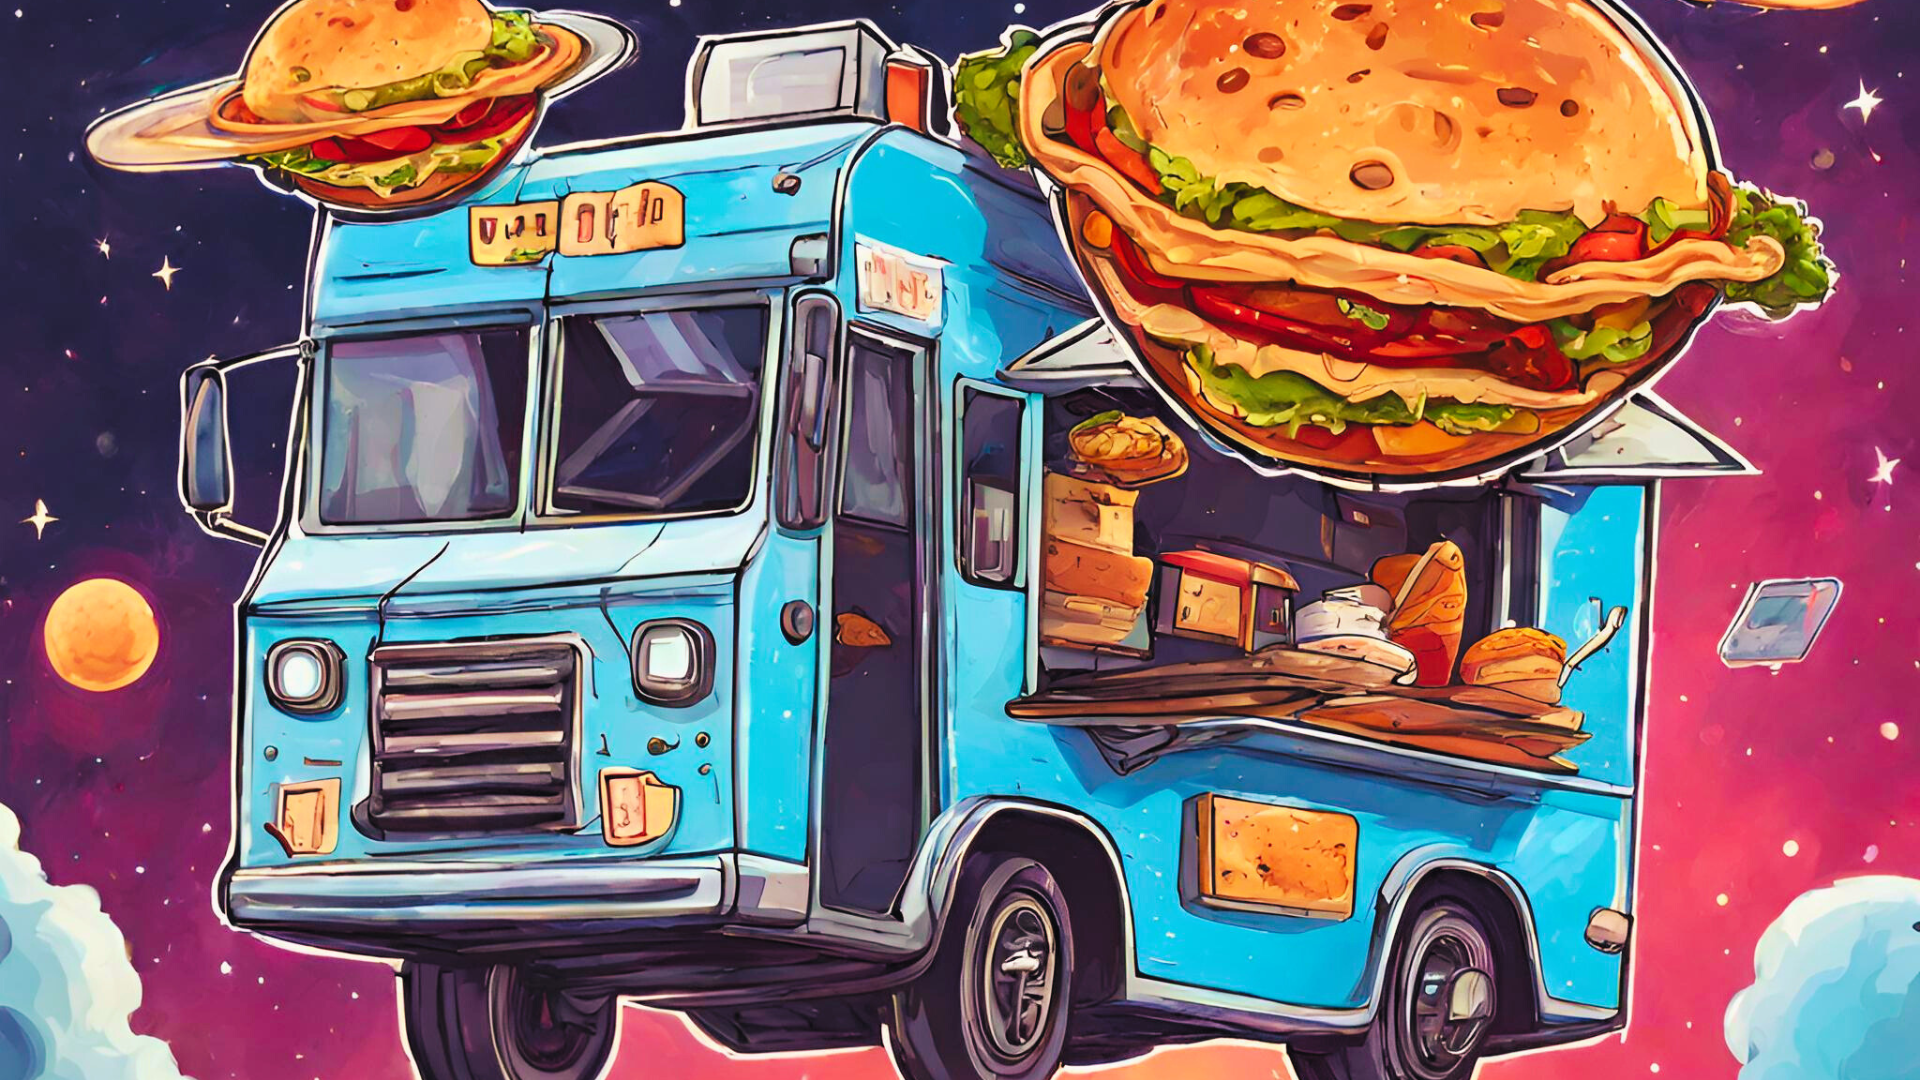 an illustration of a food truck flying through space with hamburgers on it